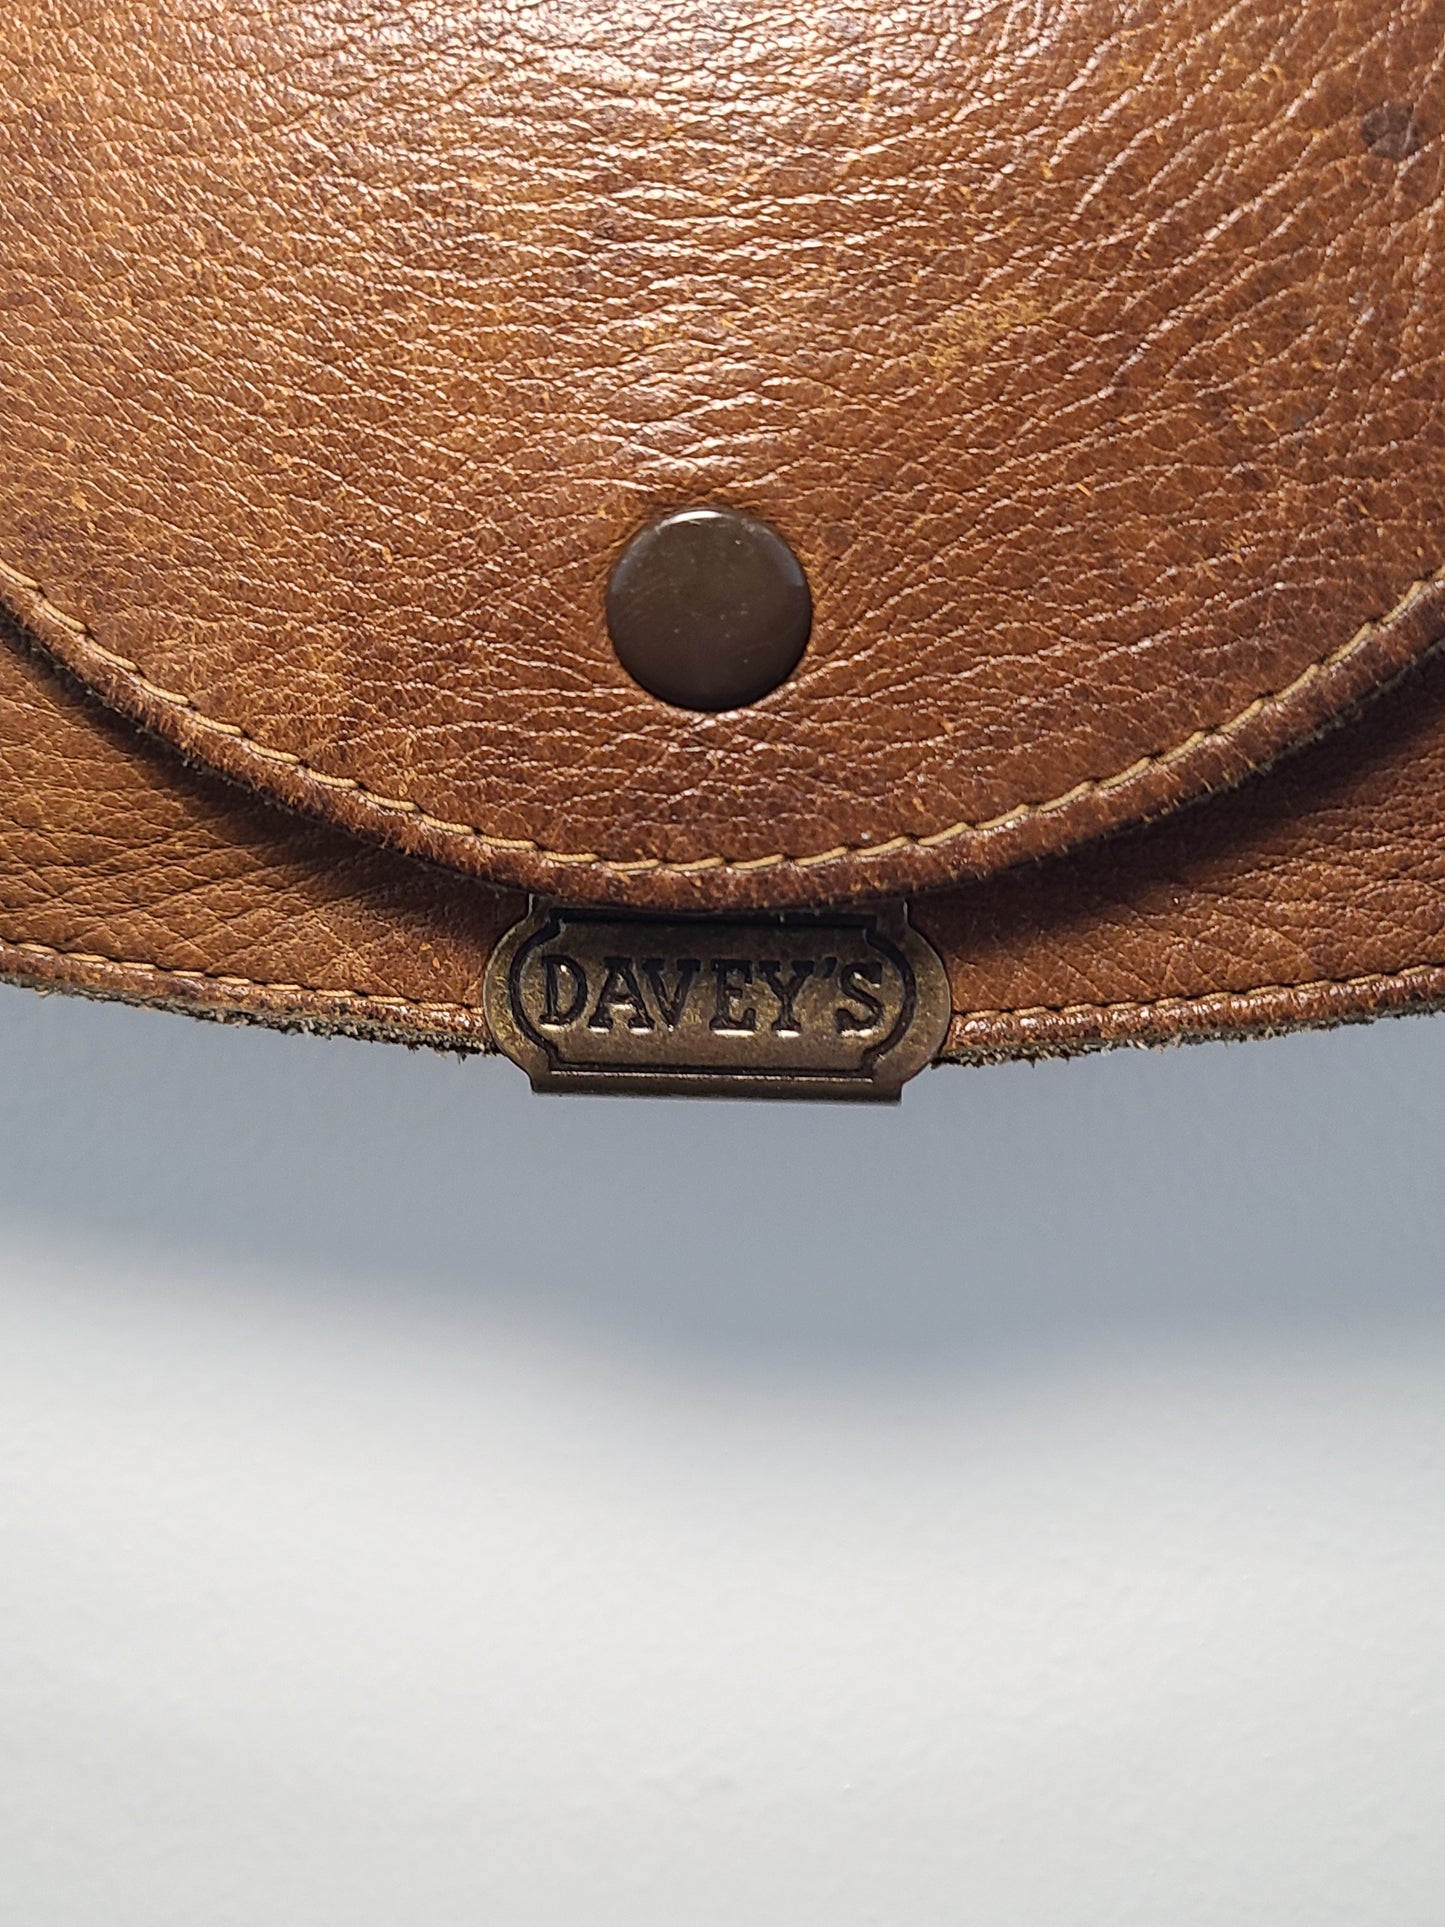 Vintage 1980s Leather Mini Crossbody Pouch